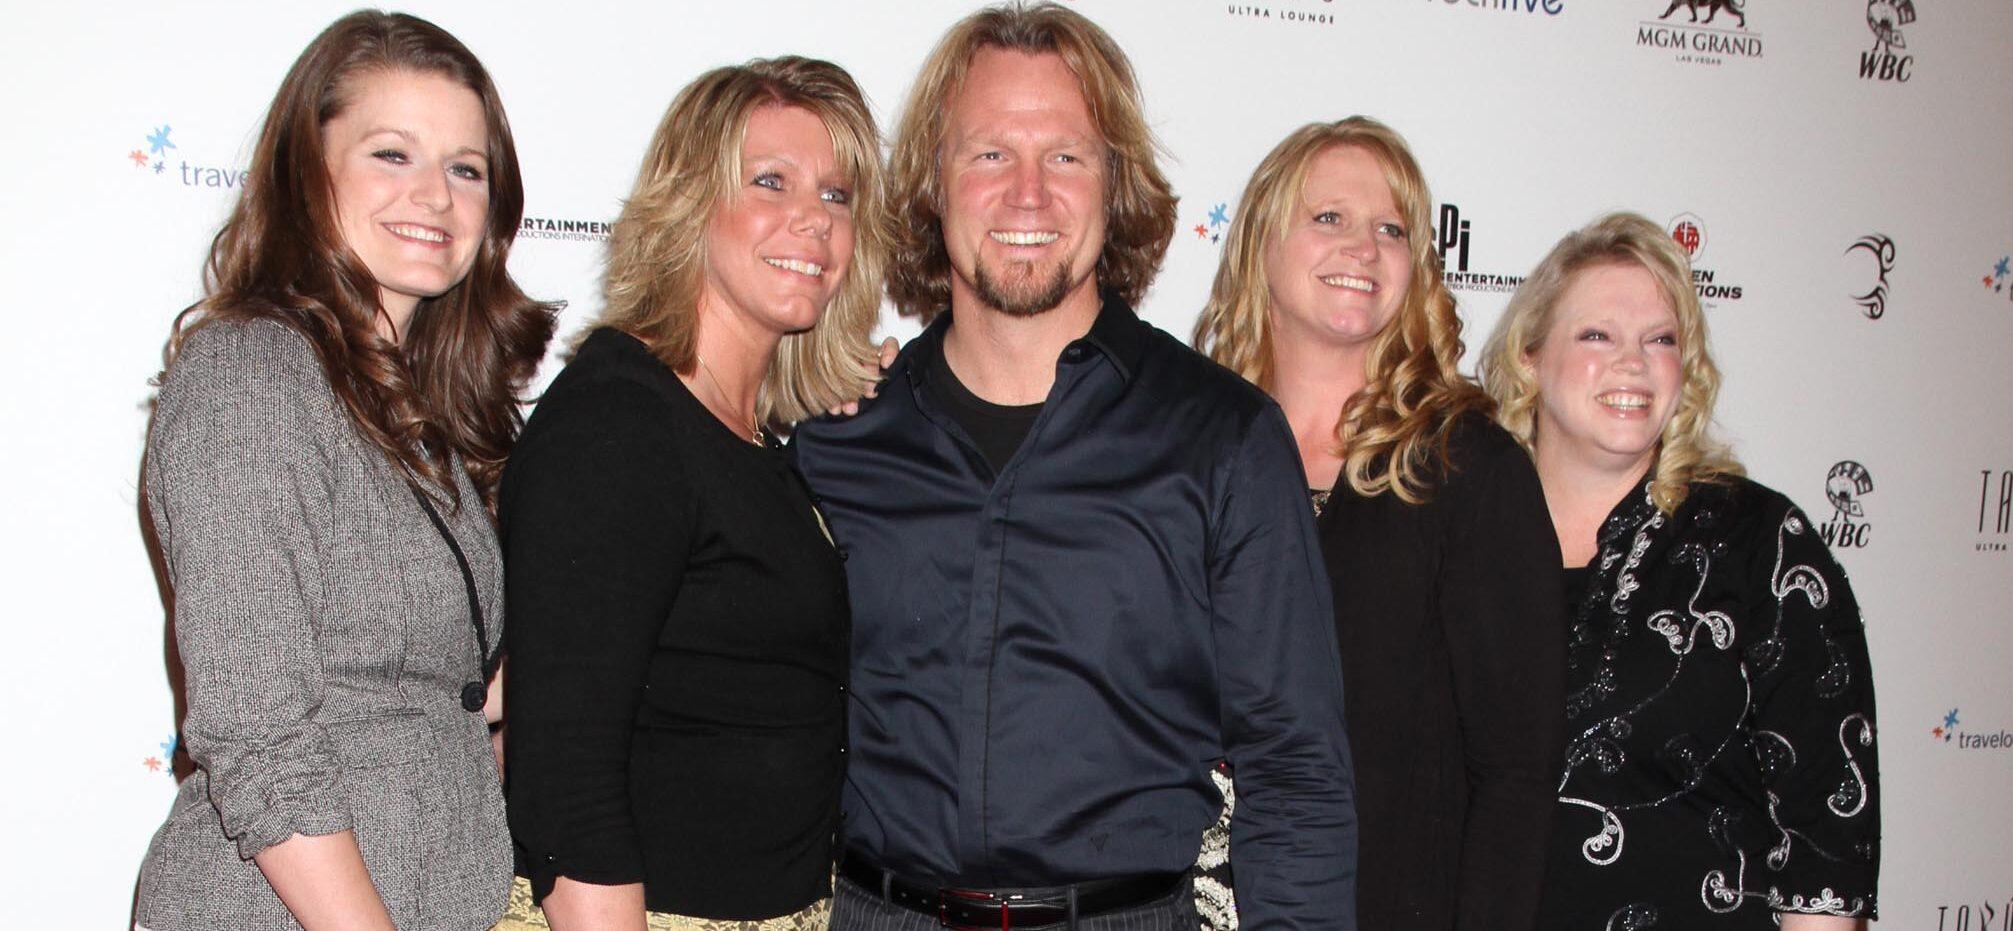 Christine Brown Walks Back Last Day Of Filming ‘Sister Wives’: ‘I Am Definitely Not Leaving’